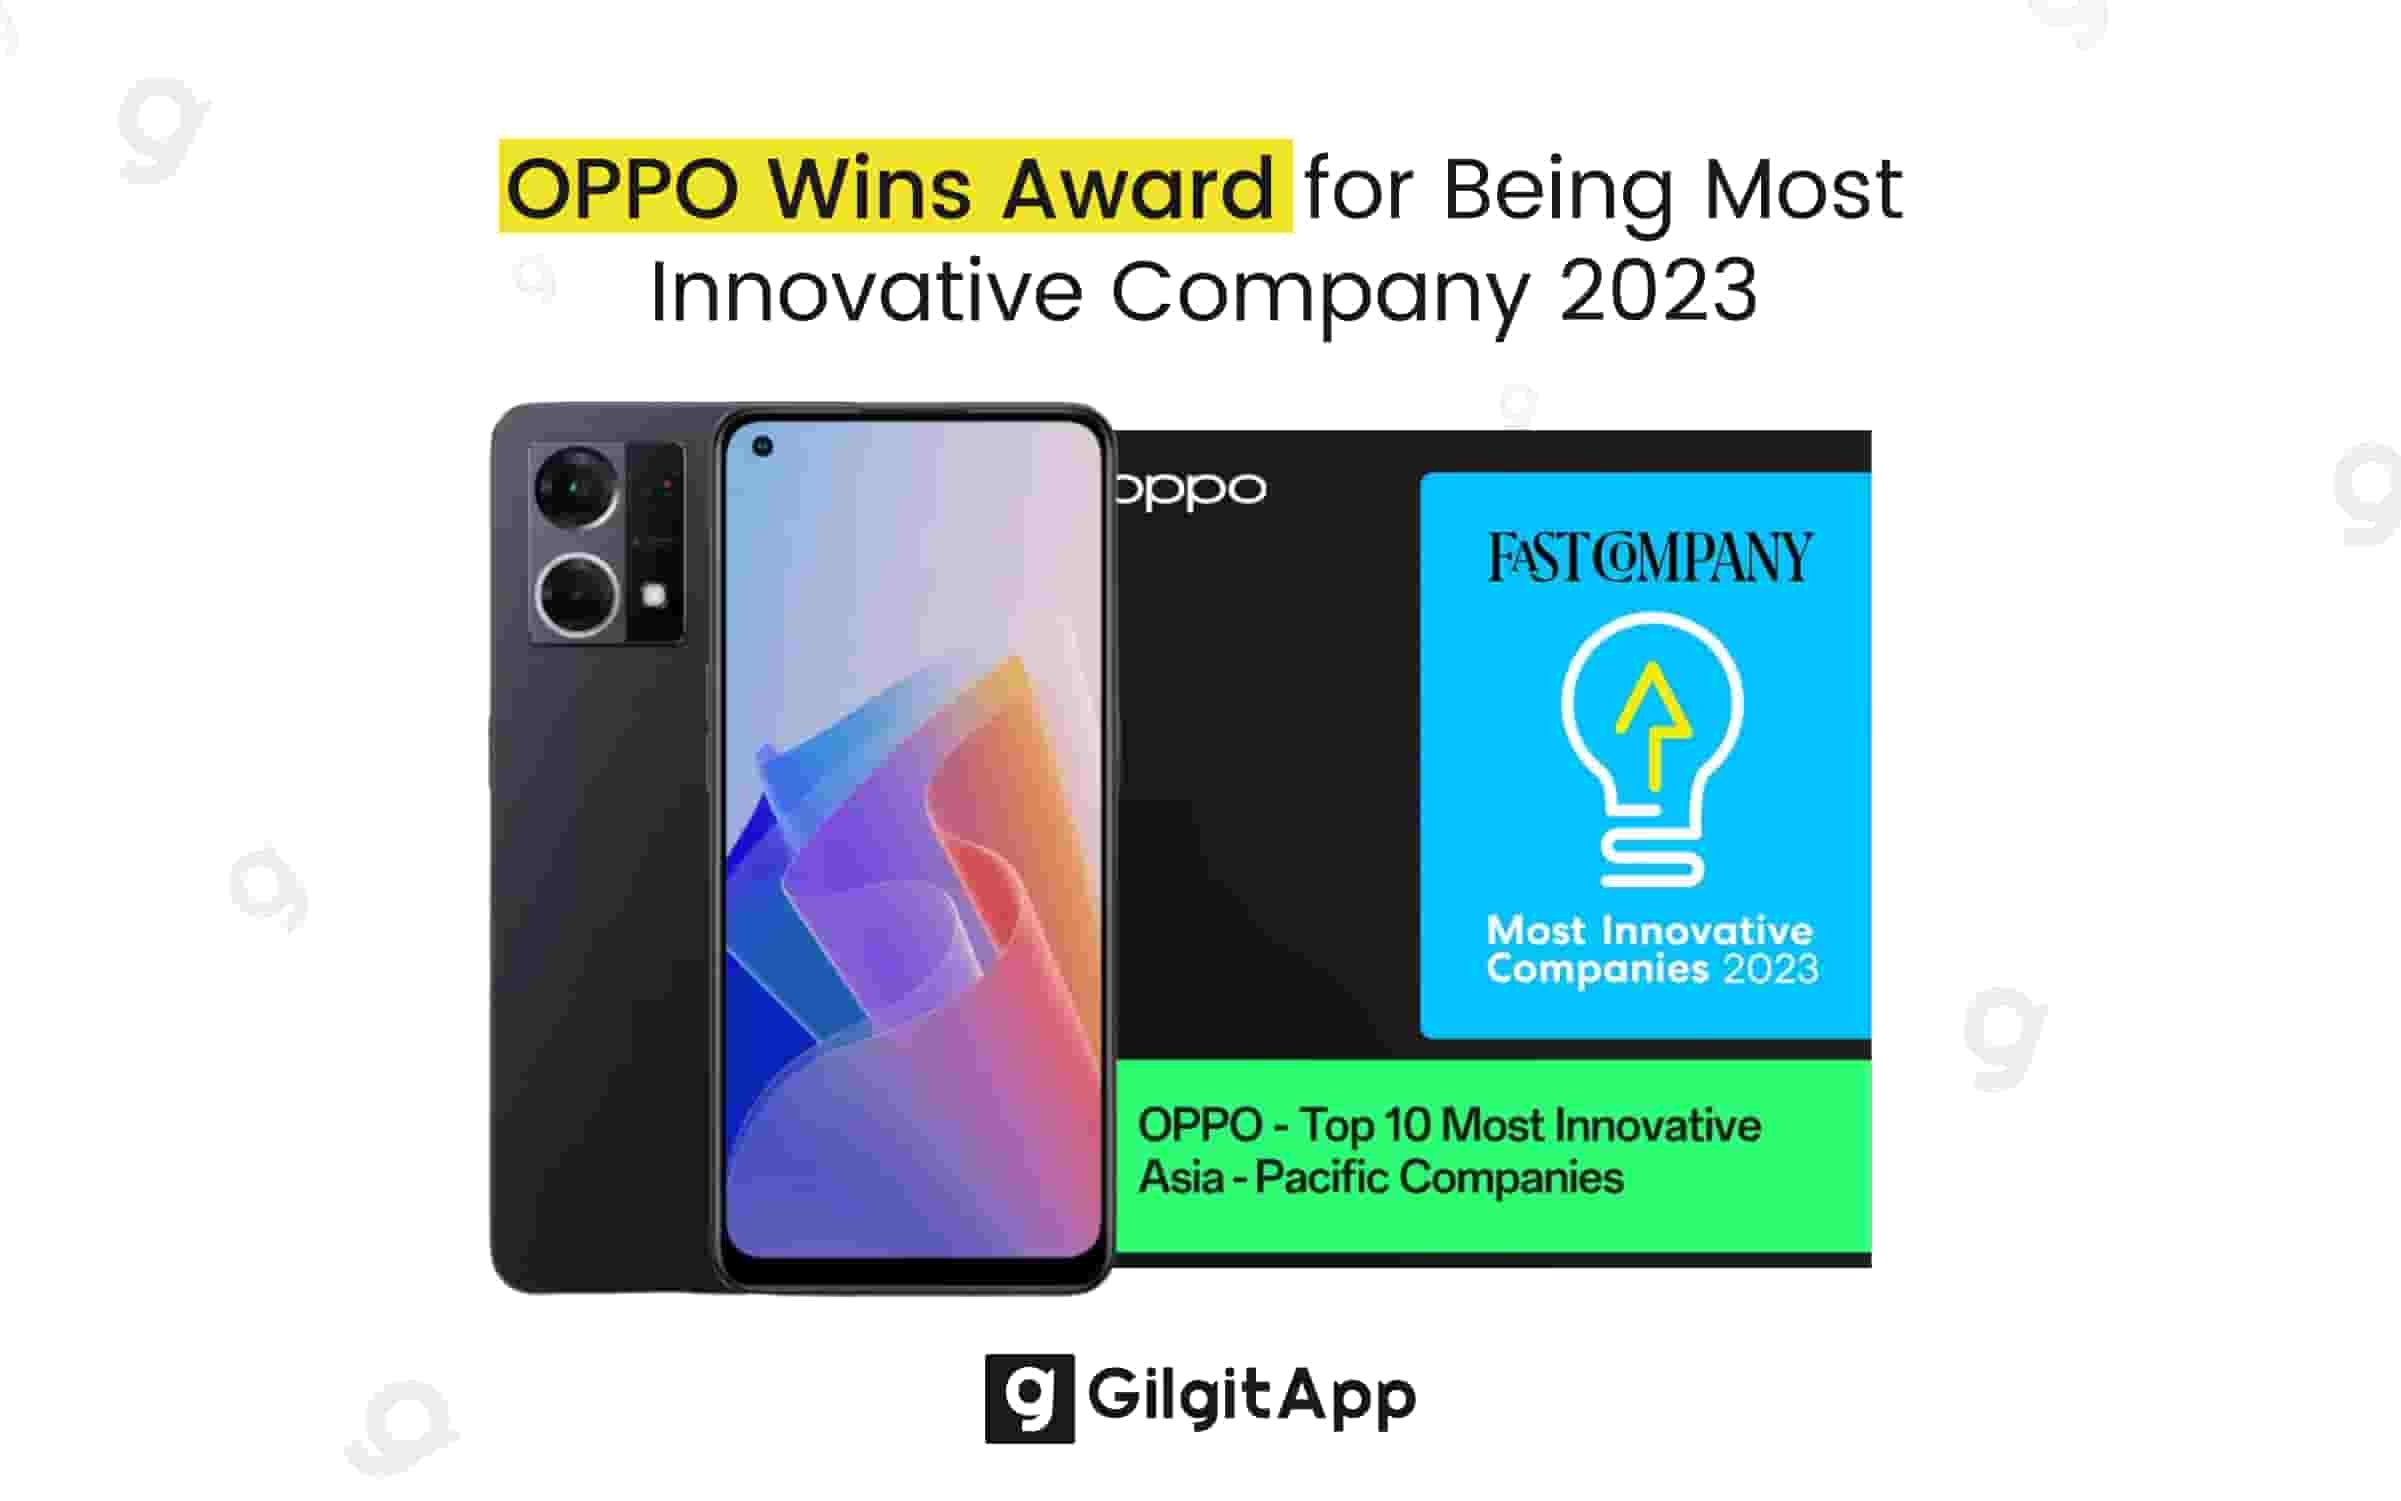 OPPO Wins Award for Being Most Innovative Company 2023